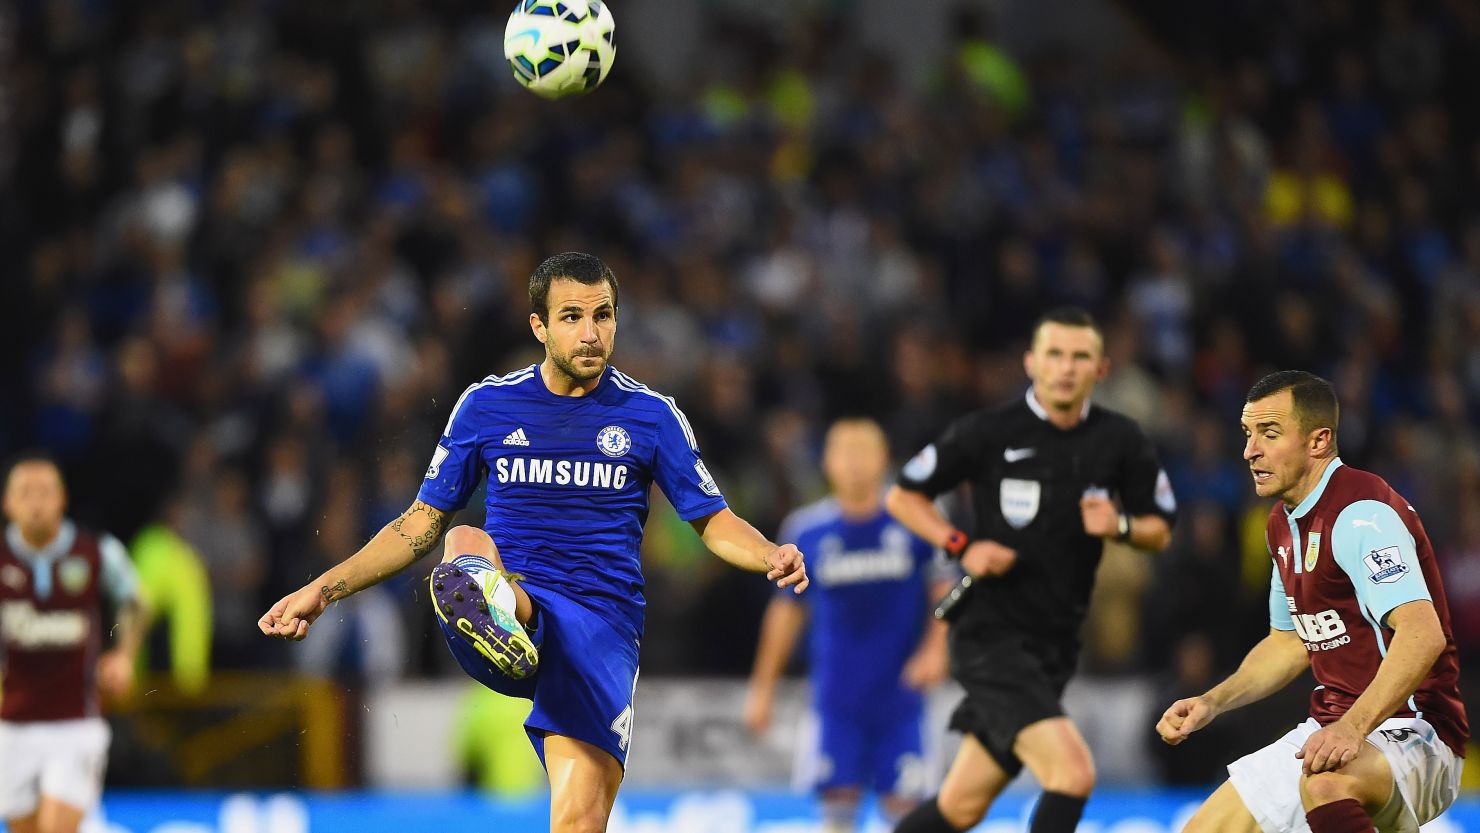 Cesc Fabregas, who joined Chelsea from Barcelona, impressed against Burnley in his team's comfortable win. 